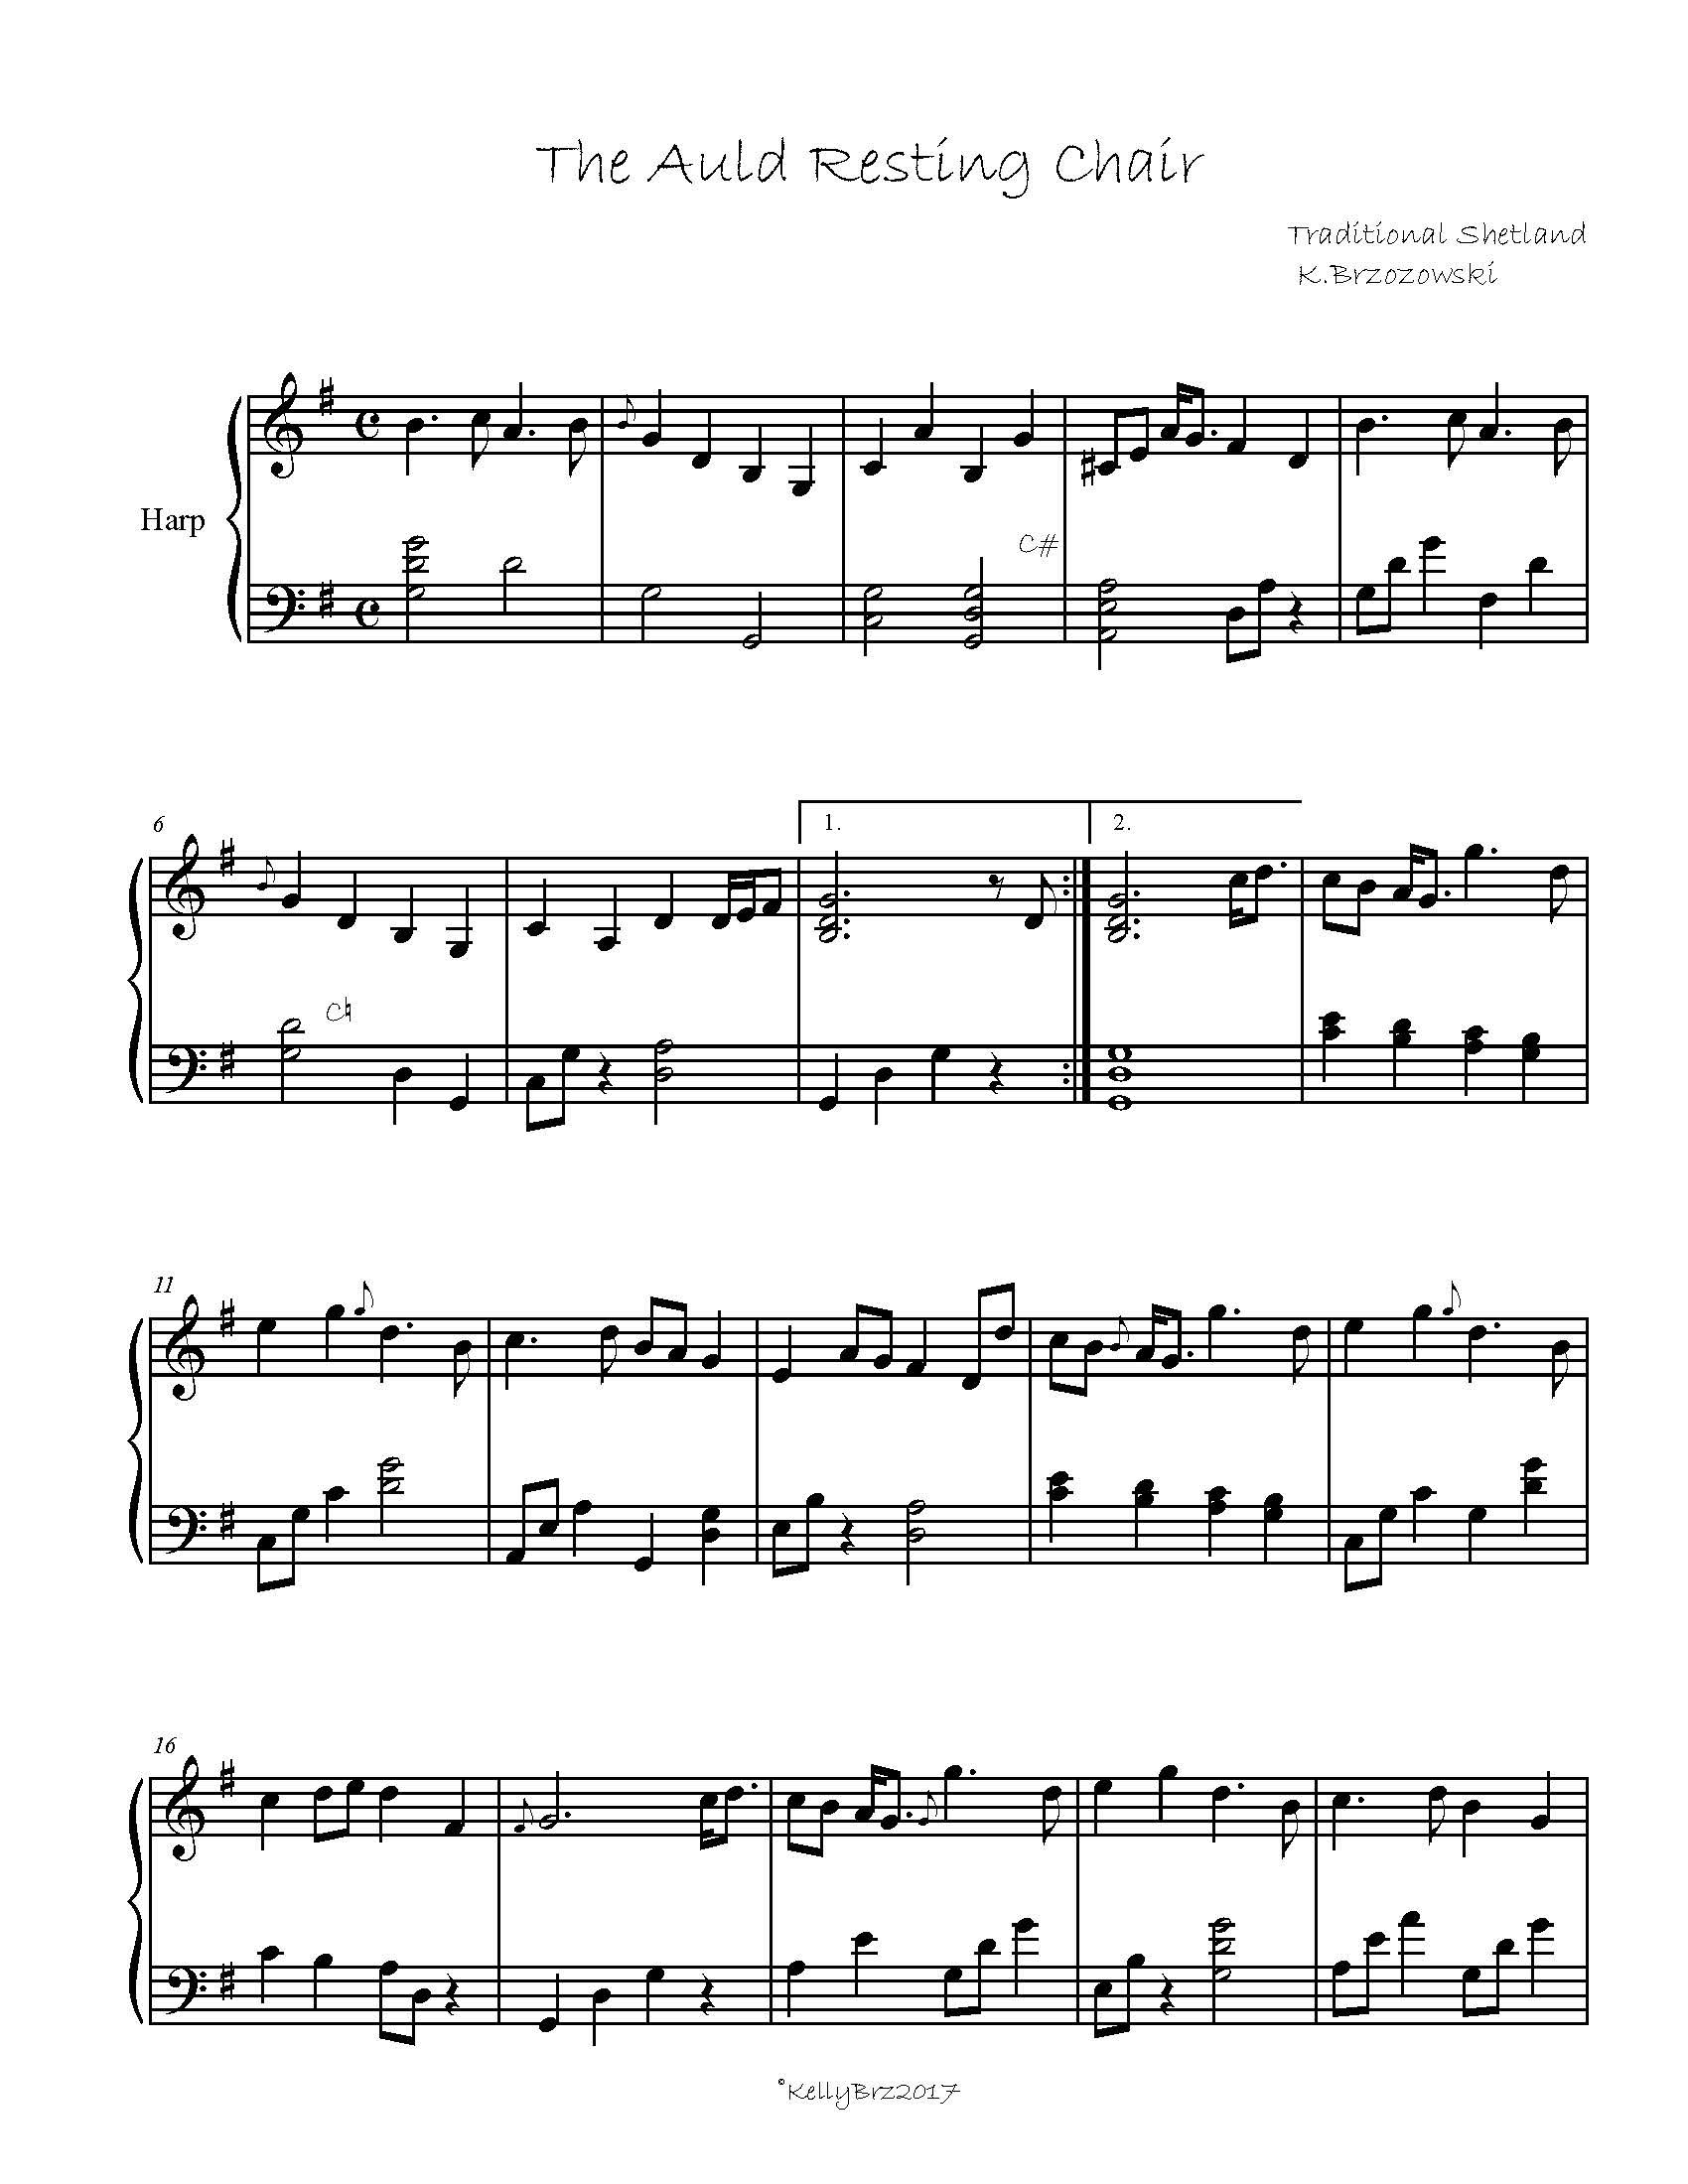 A Sample page of sheet music